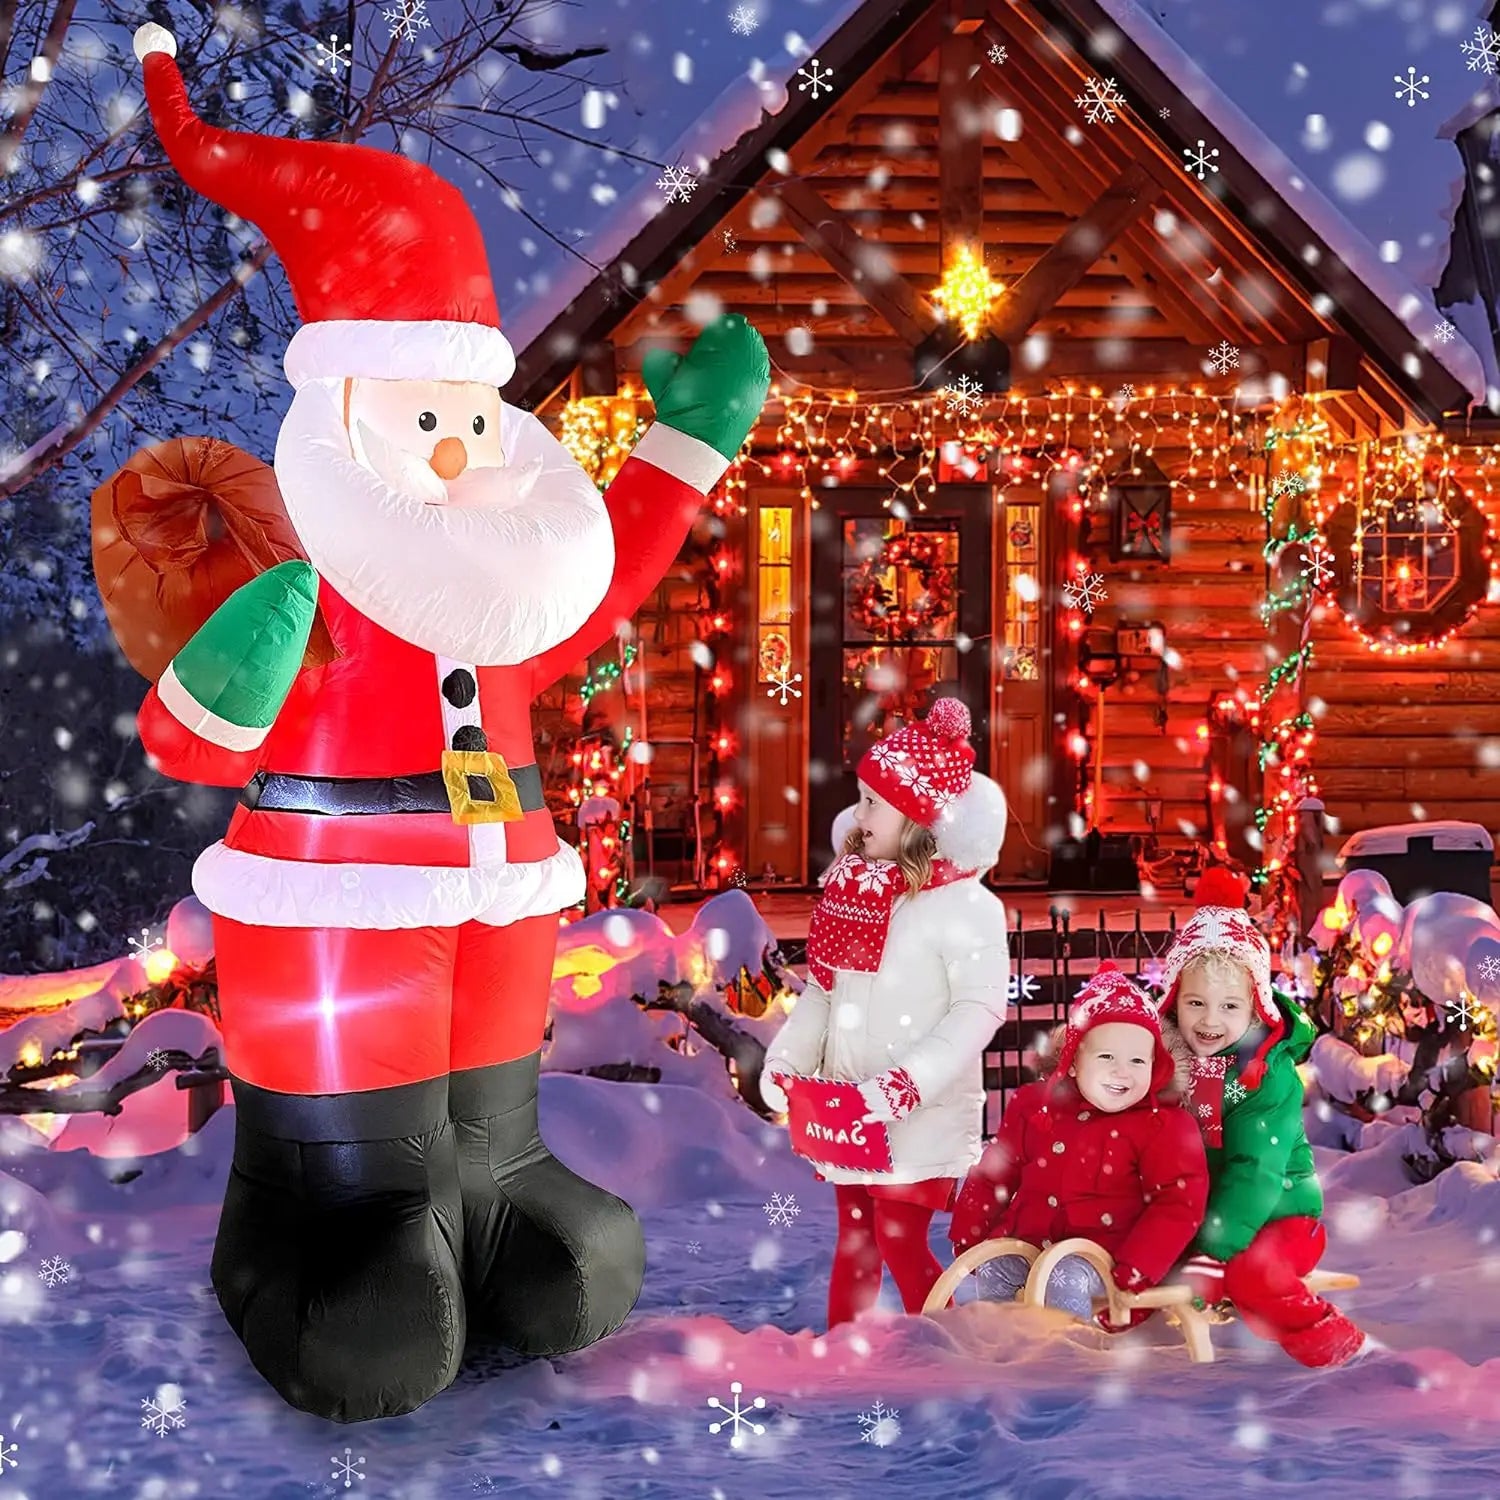 Santa Claus Inflatable Christmas Inflatables Decorations with LED Lights - Festive Blow Up Yard Decorations for Indoor and Outdoor Garden Decorations ShopOnlyDeal